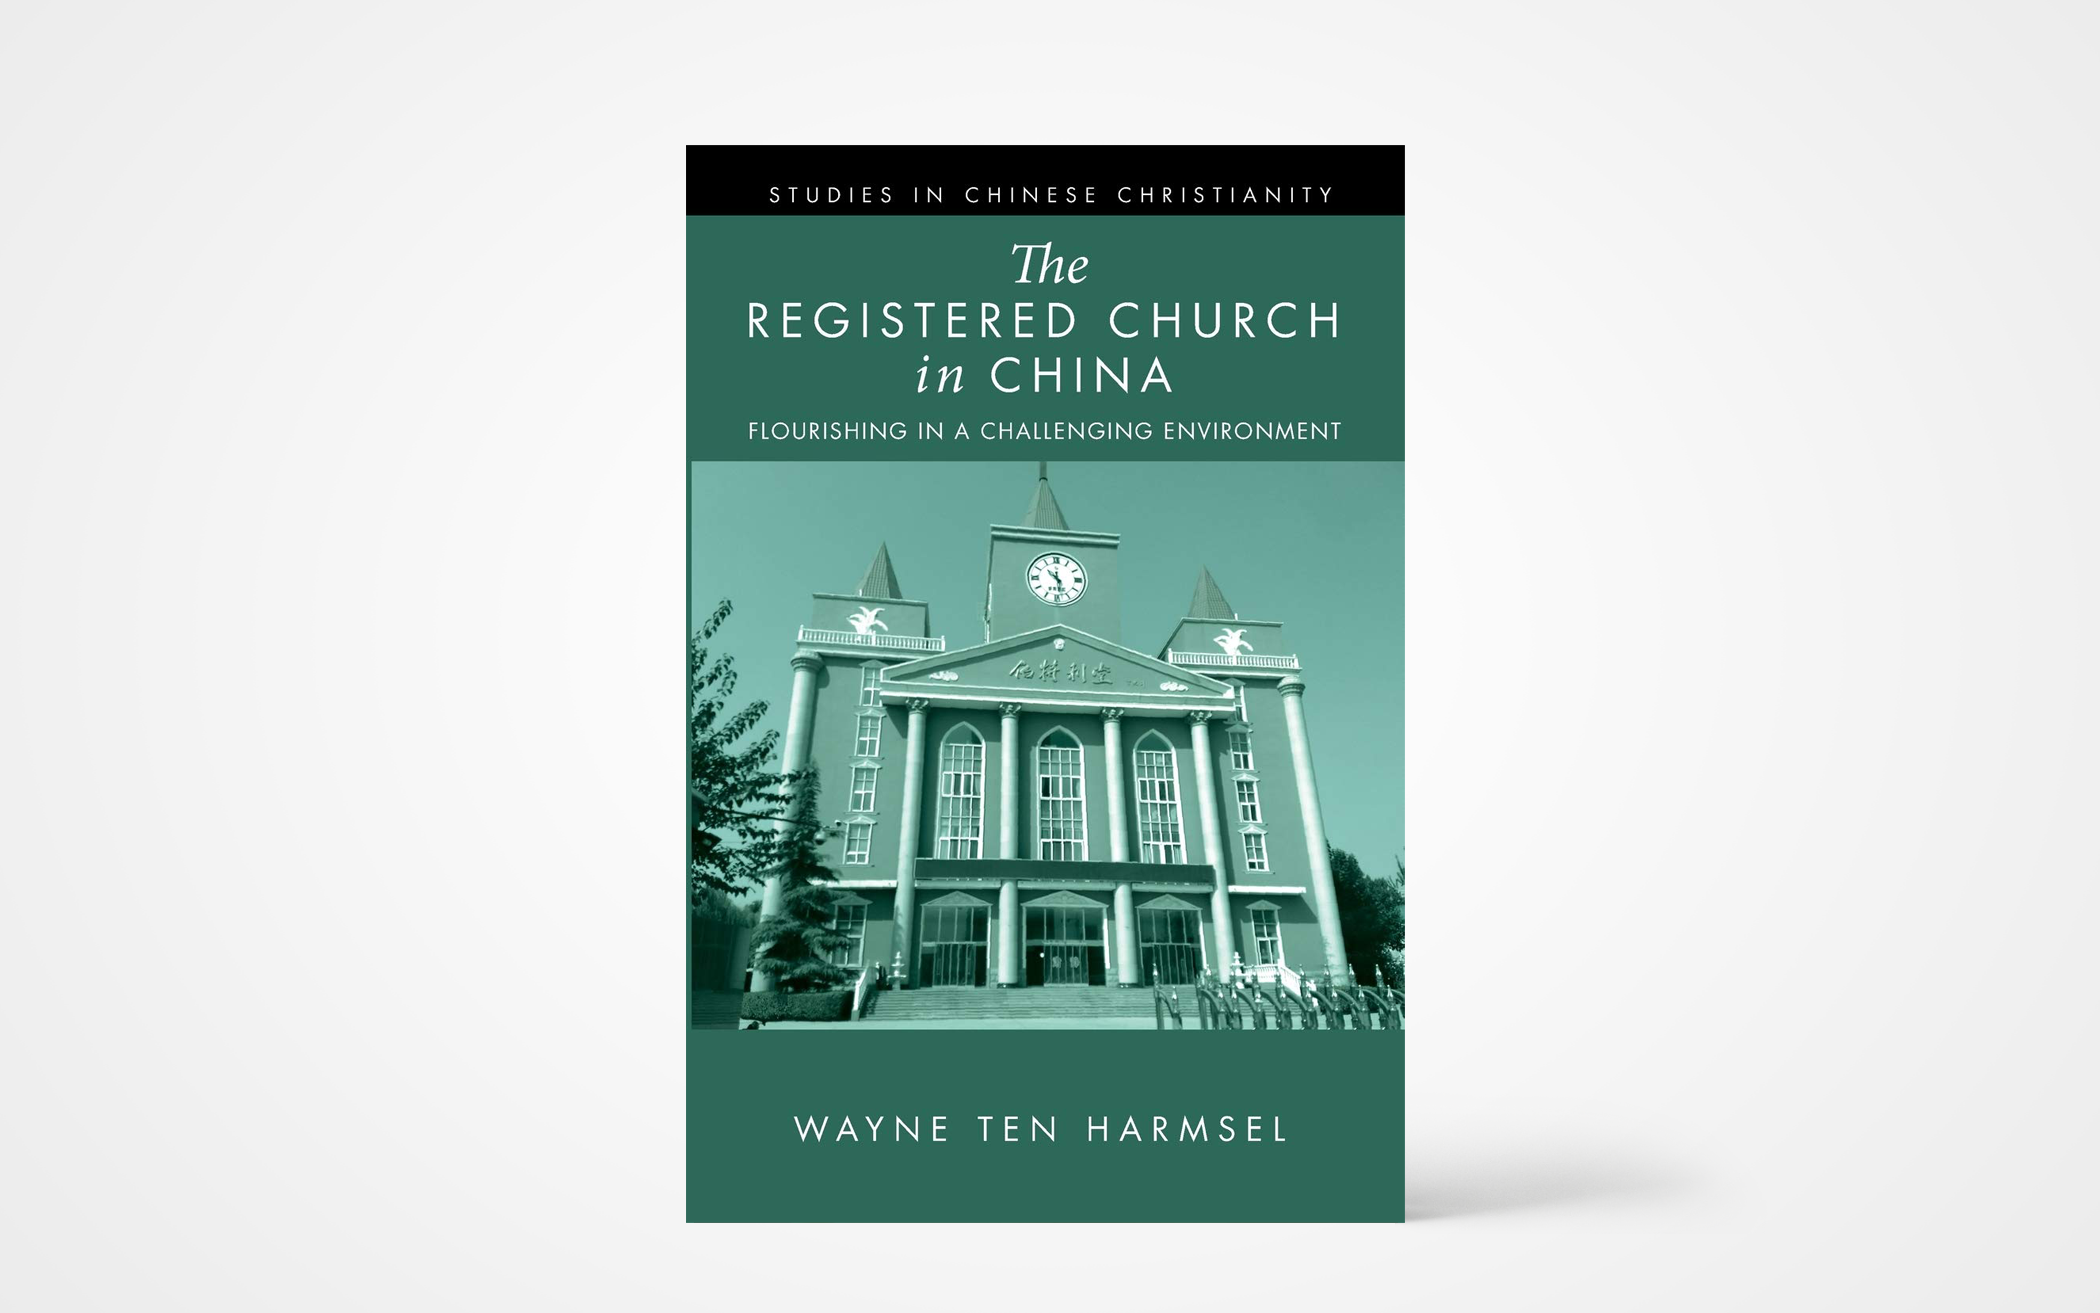 The Registered Church in China